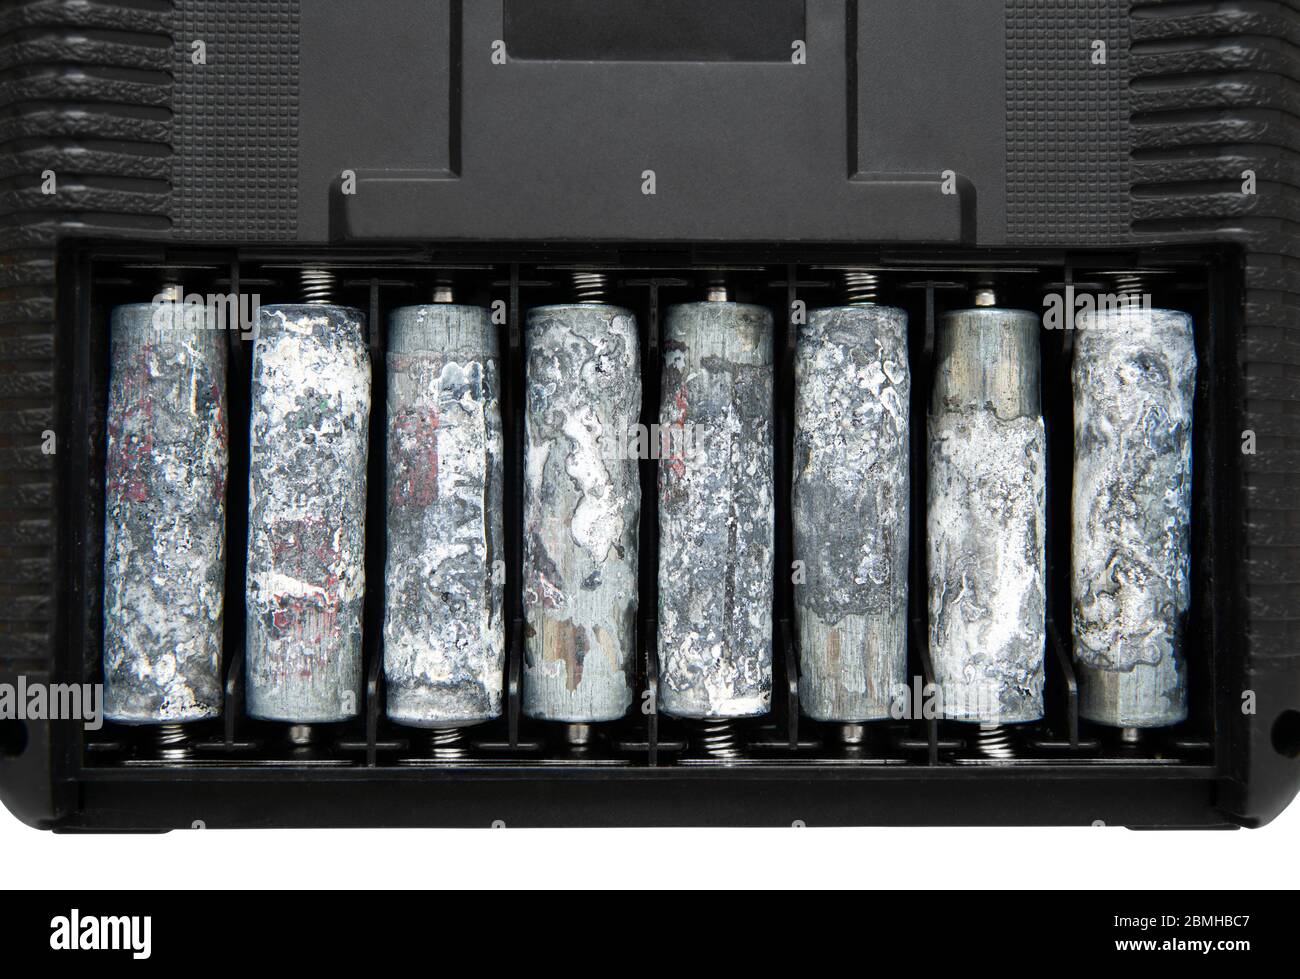 A row of eight unwrapped and heavily oxidized AA batteries inside the battery compartment of an electronic device. Stock Photo